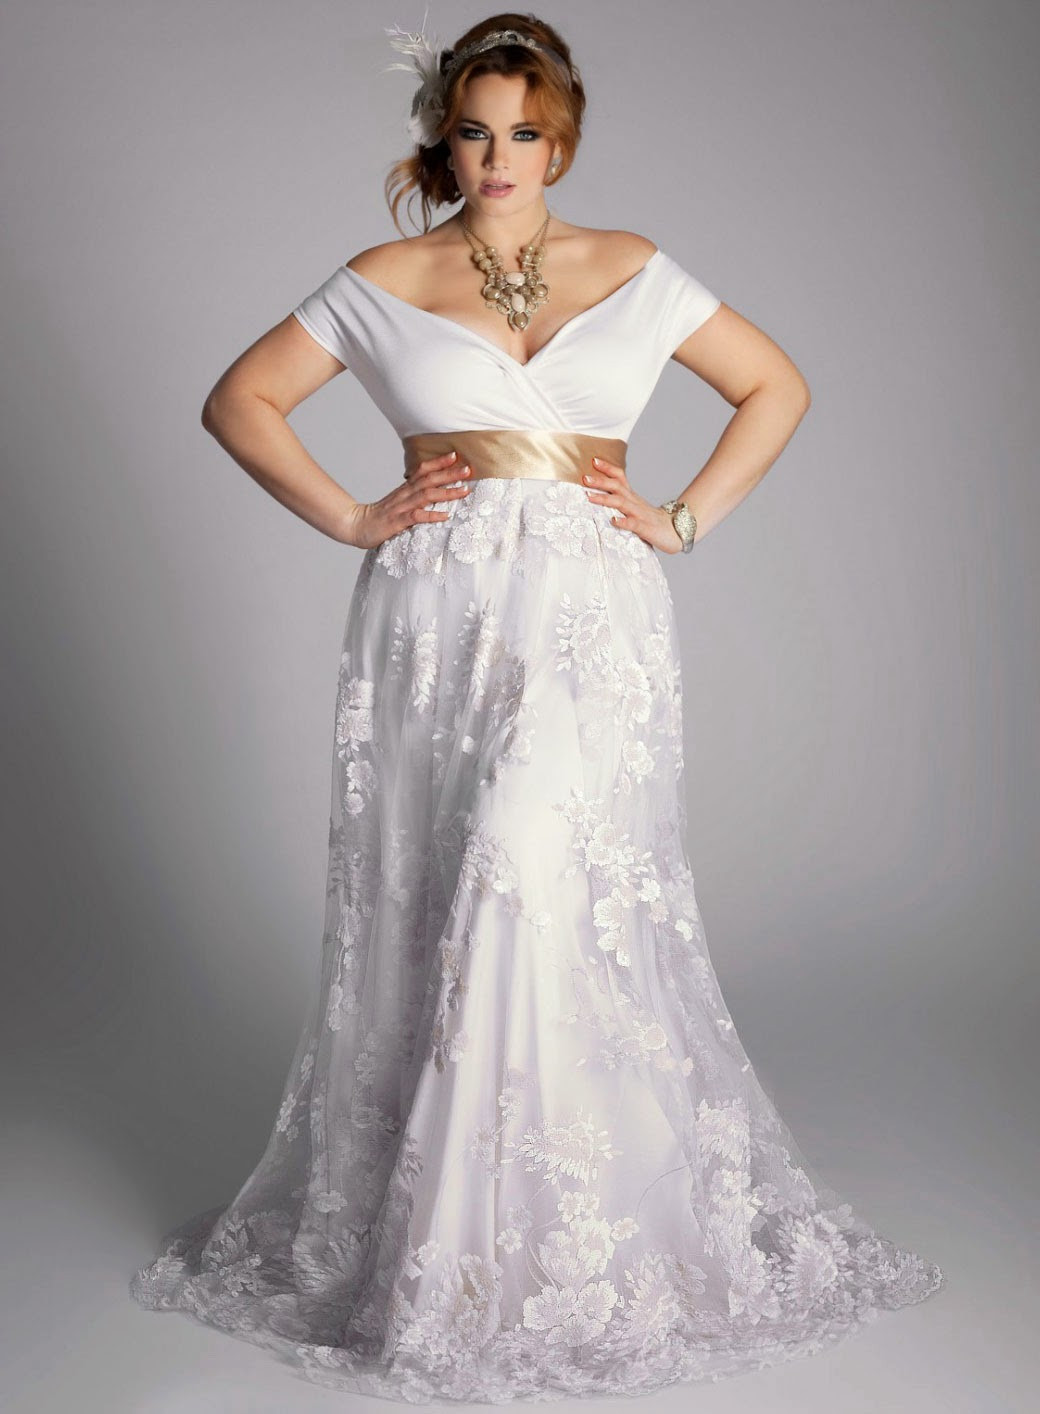 Plus Size Casual Wedding Dresses
 White Casual Plus Size Wedding Dresses Design Ideas